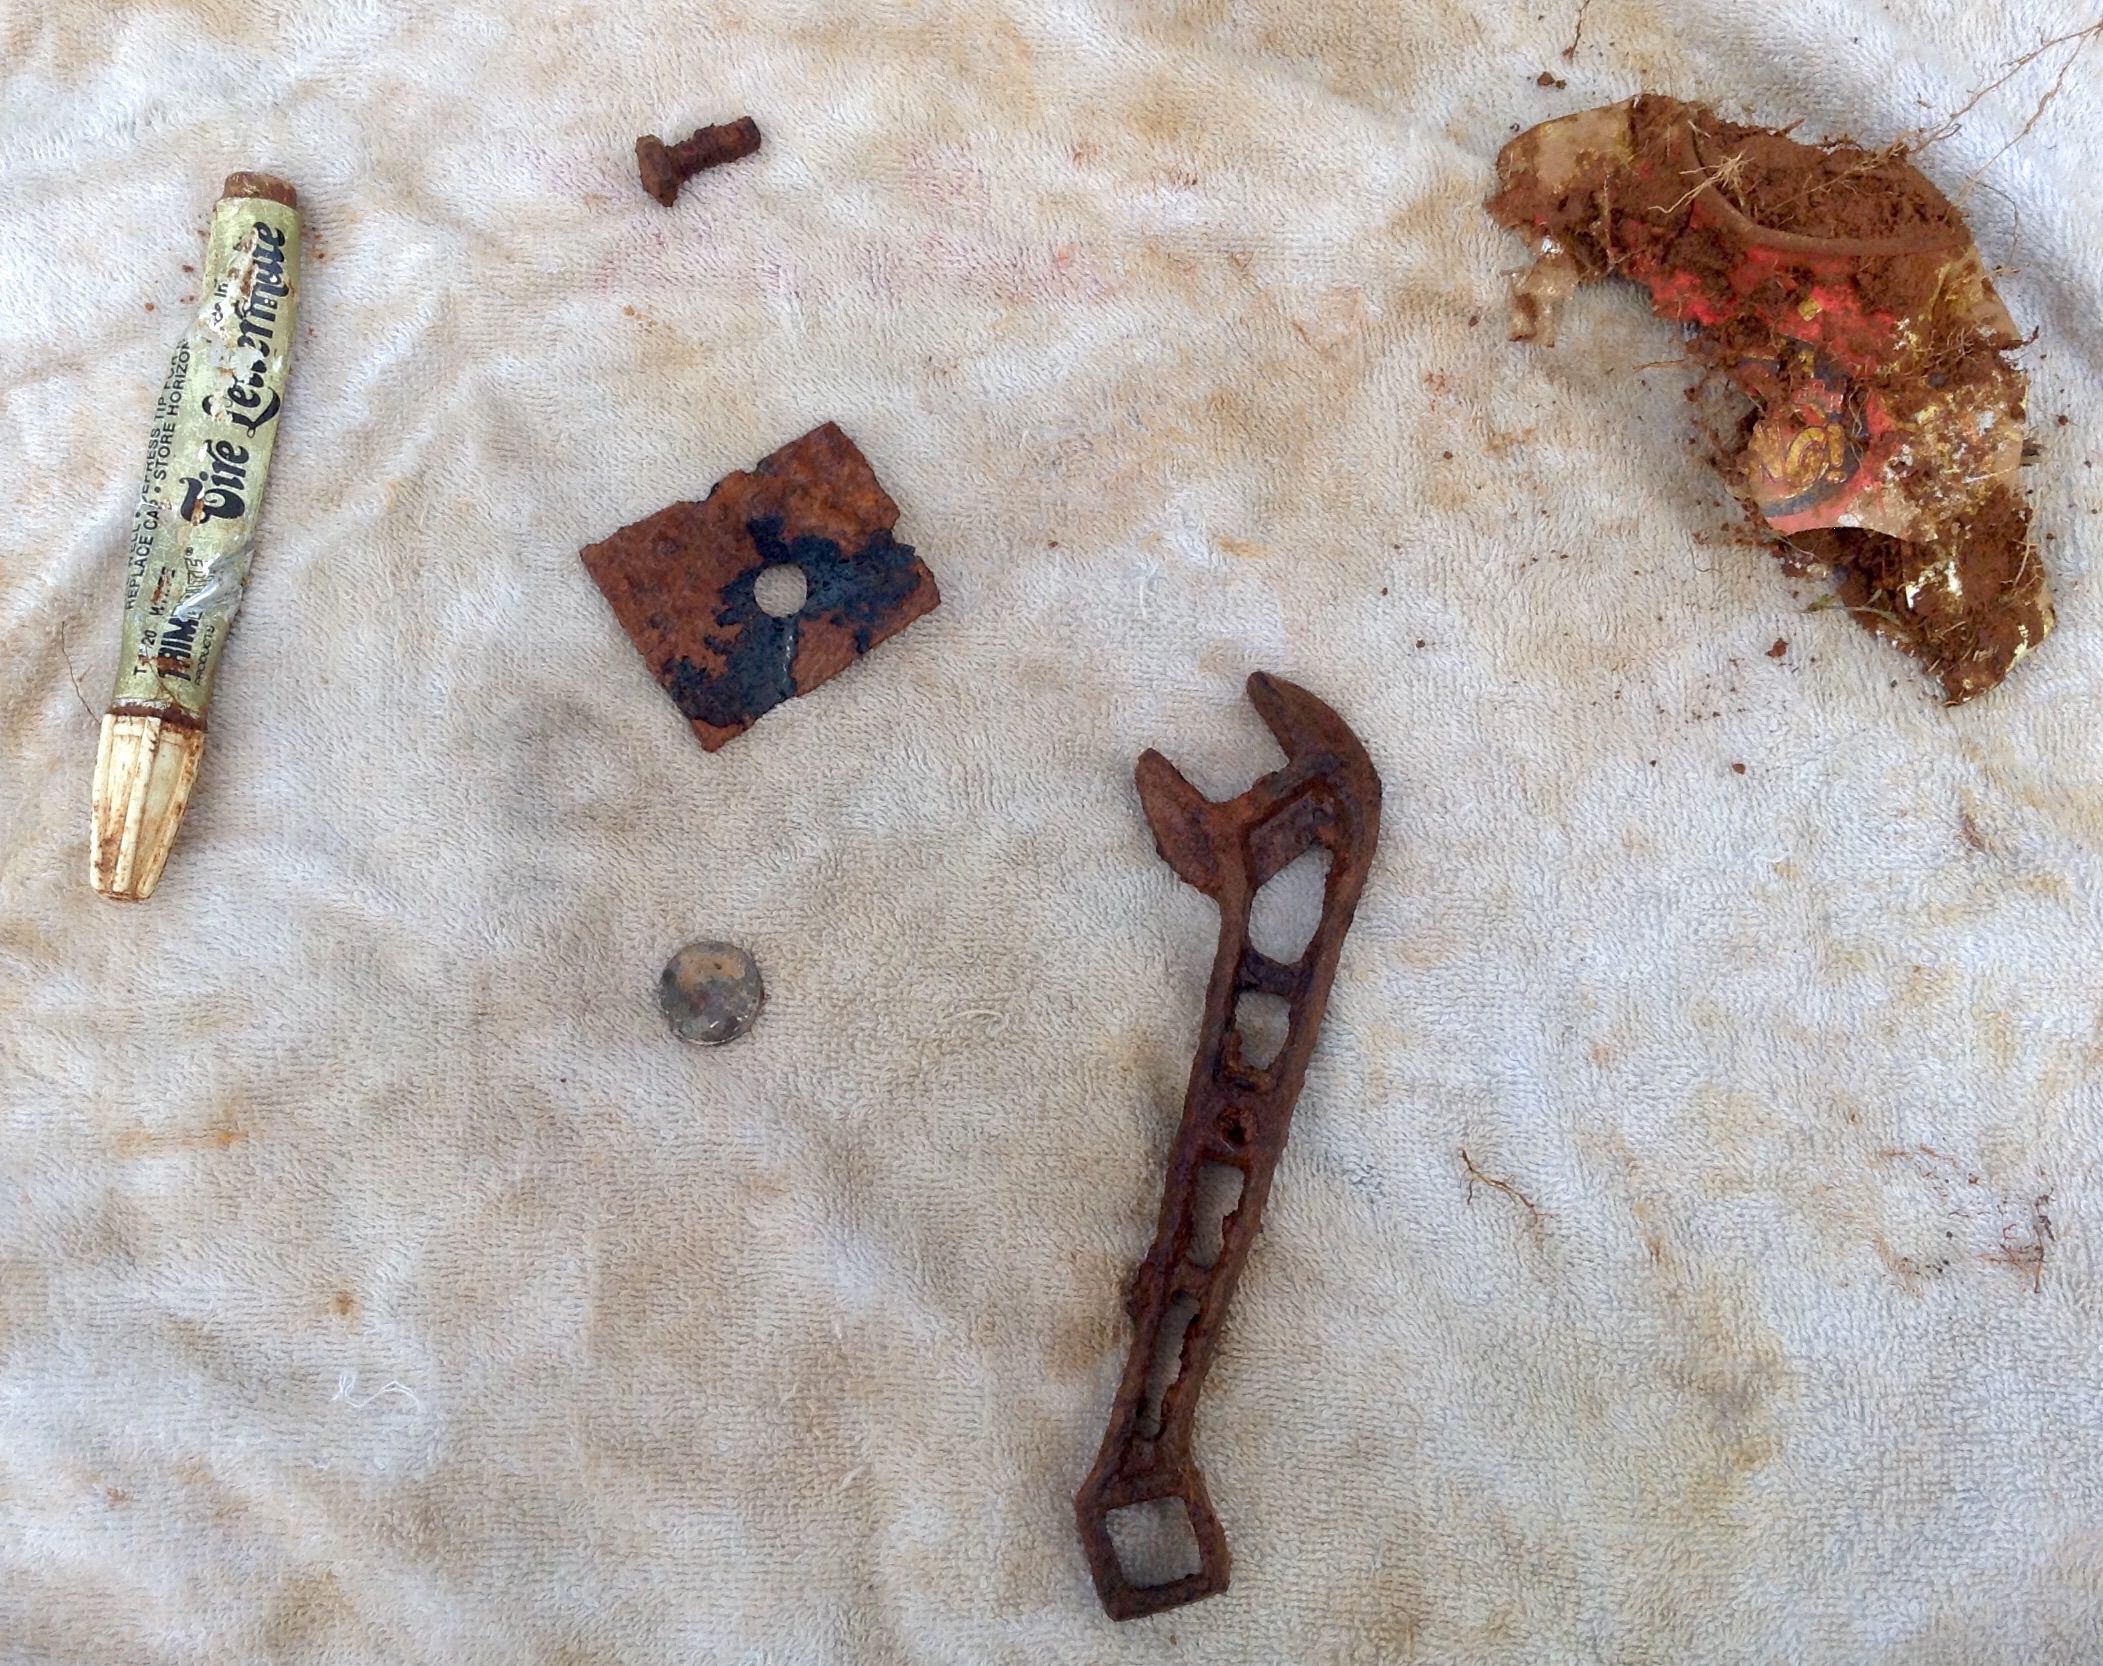 Finds for the day, Dec 21,2014, 1984 penny, tire paint marker, soda can, bolt, old tool, etc.